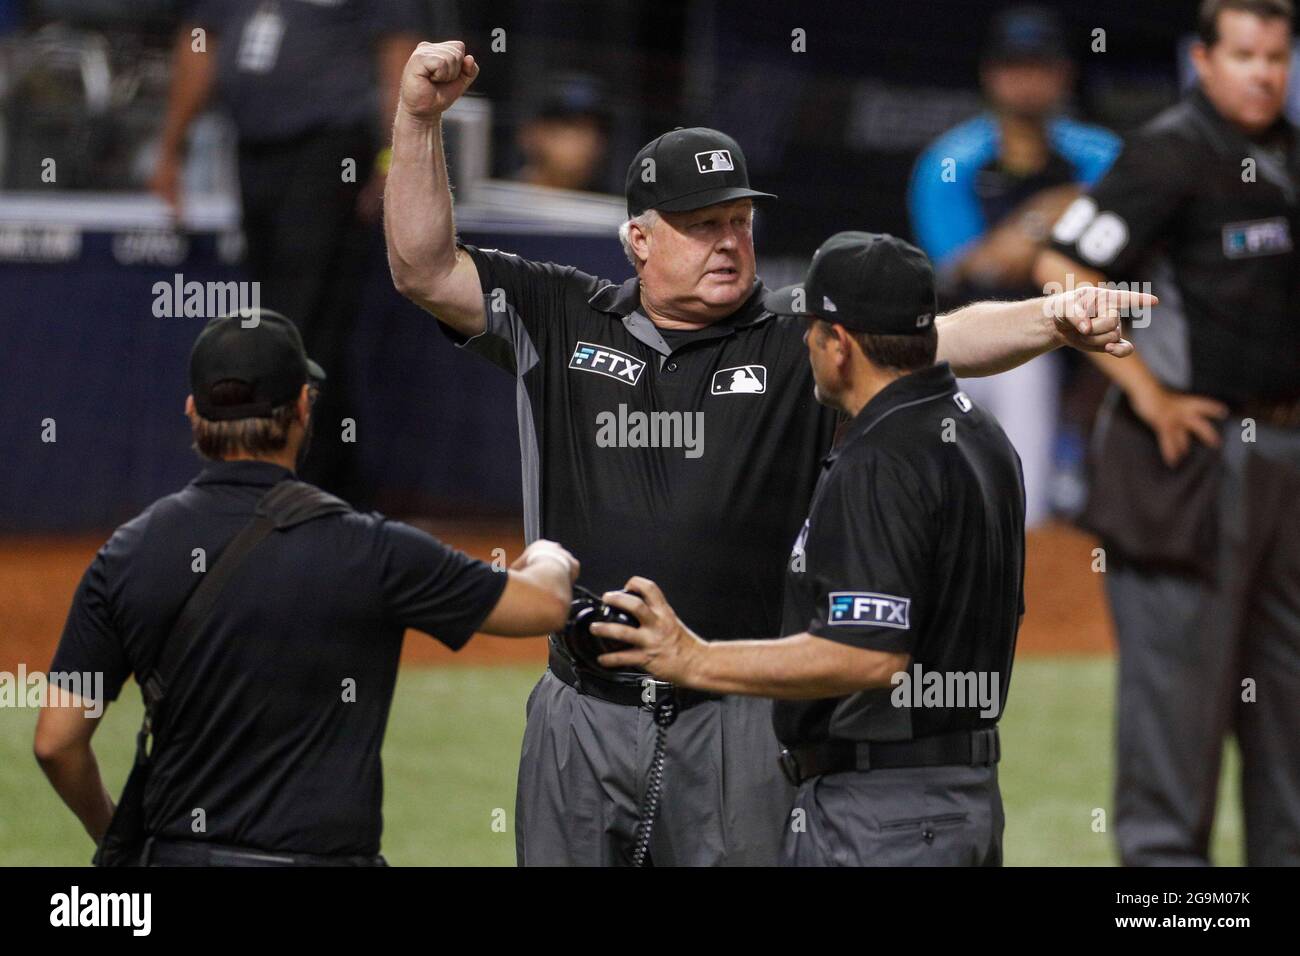 MLB second base umpire Brian Knight calls an out for interference ending an MLB regular season game between the San Diego Padres and Miami Marlins, Sa Stock Photo